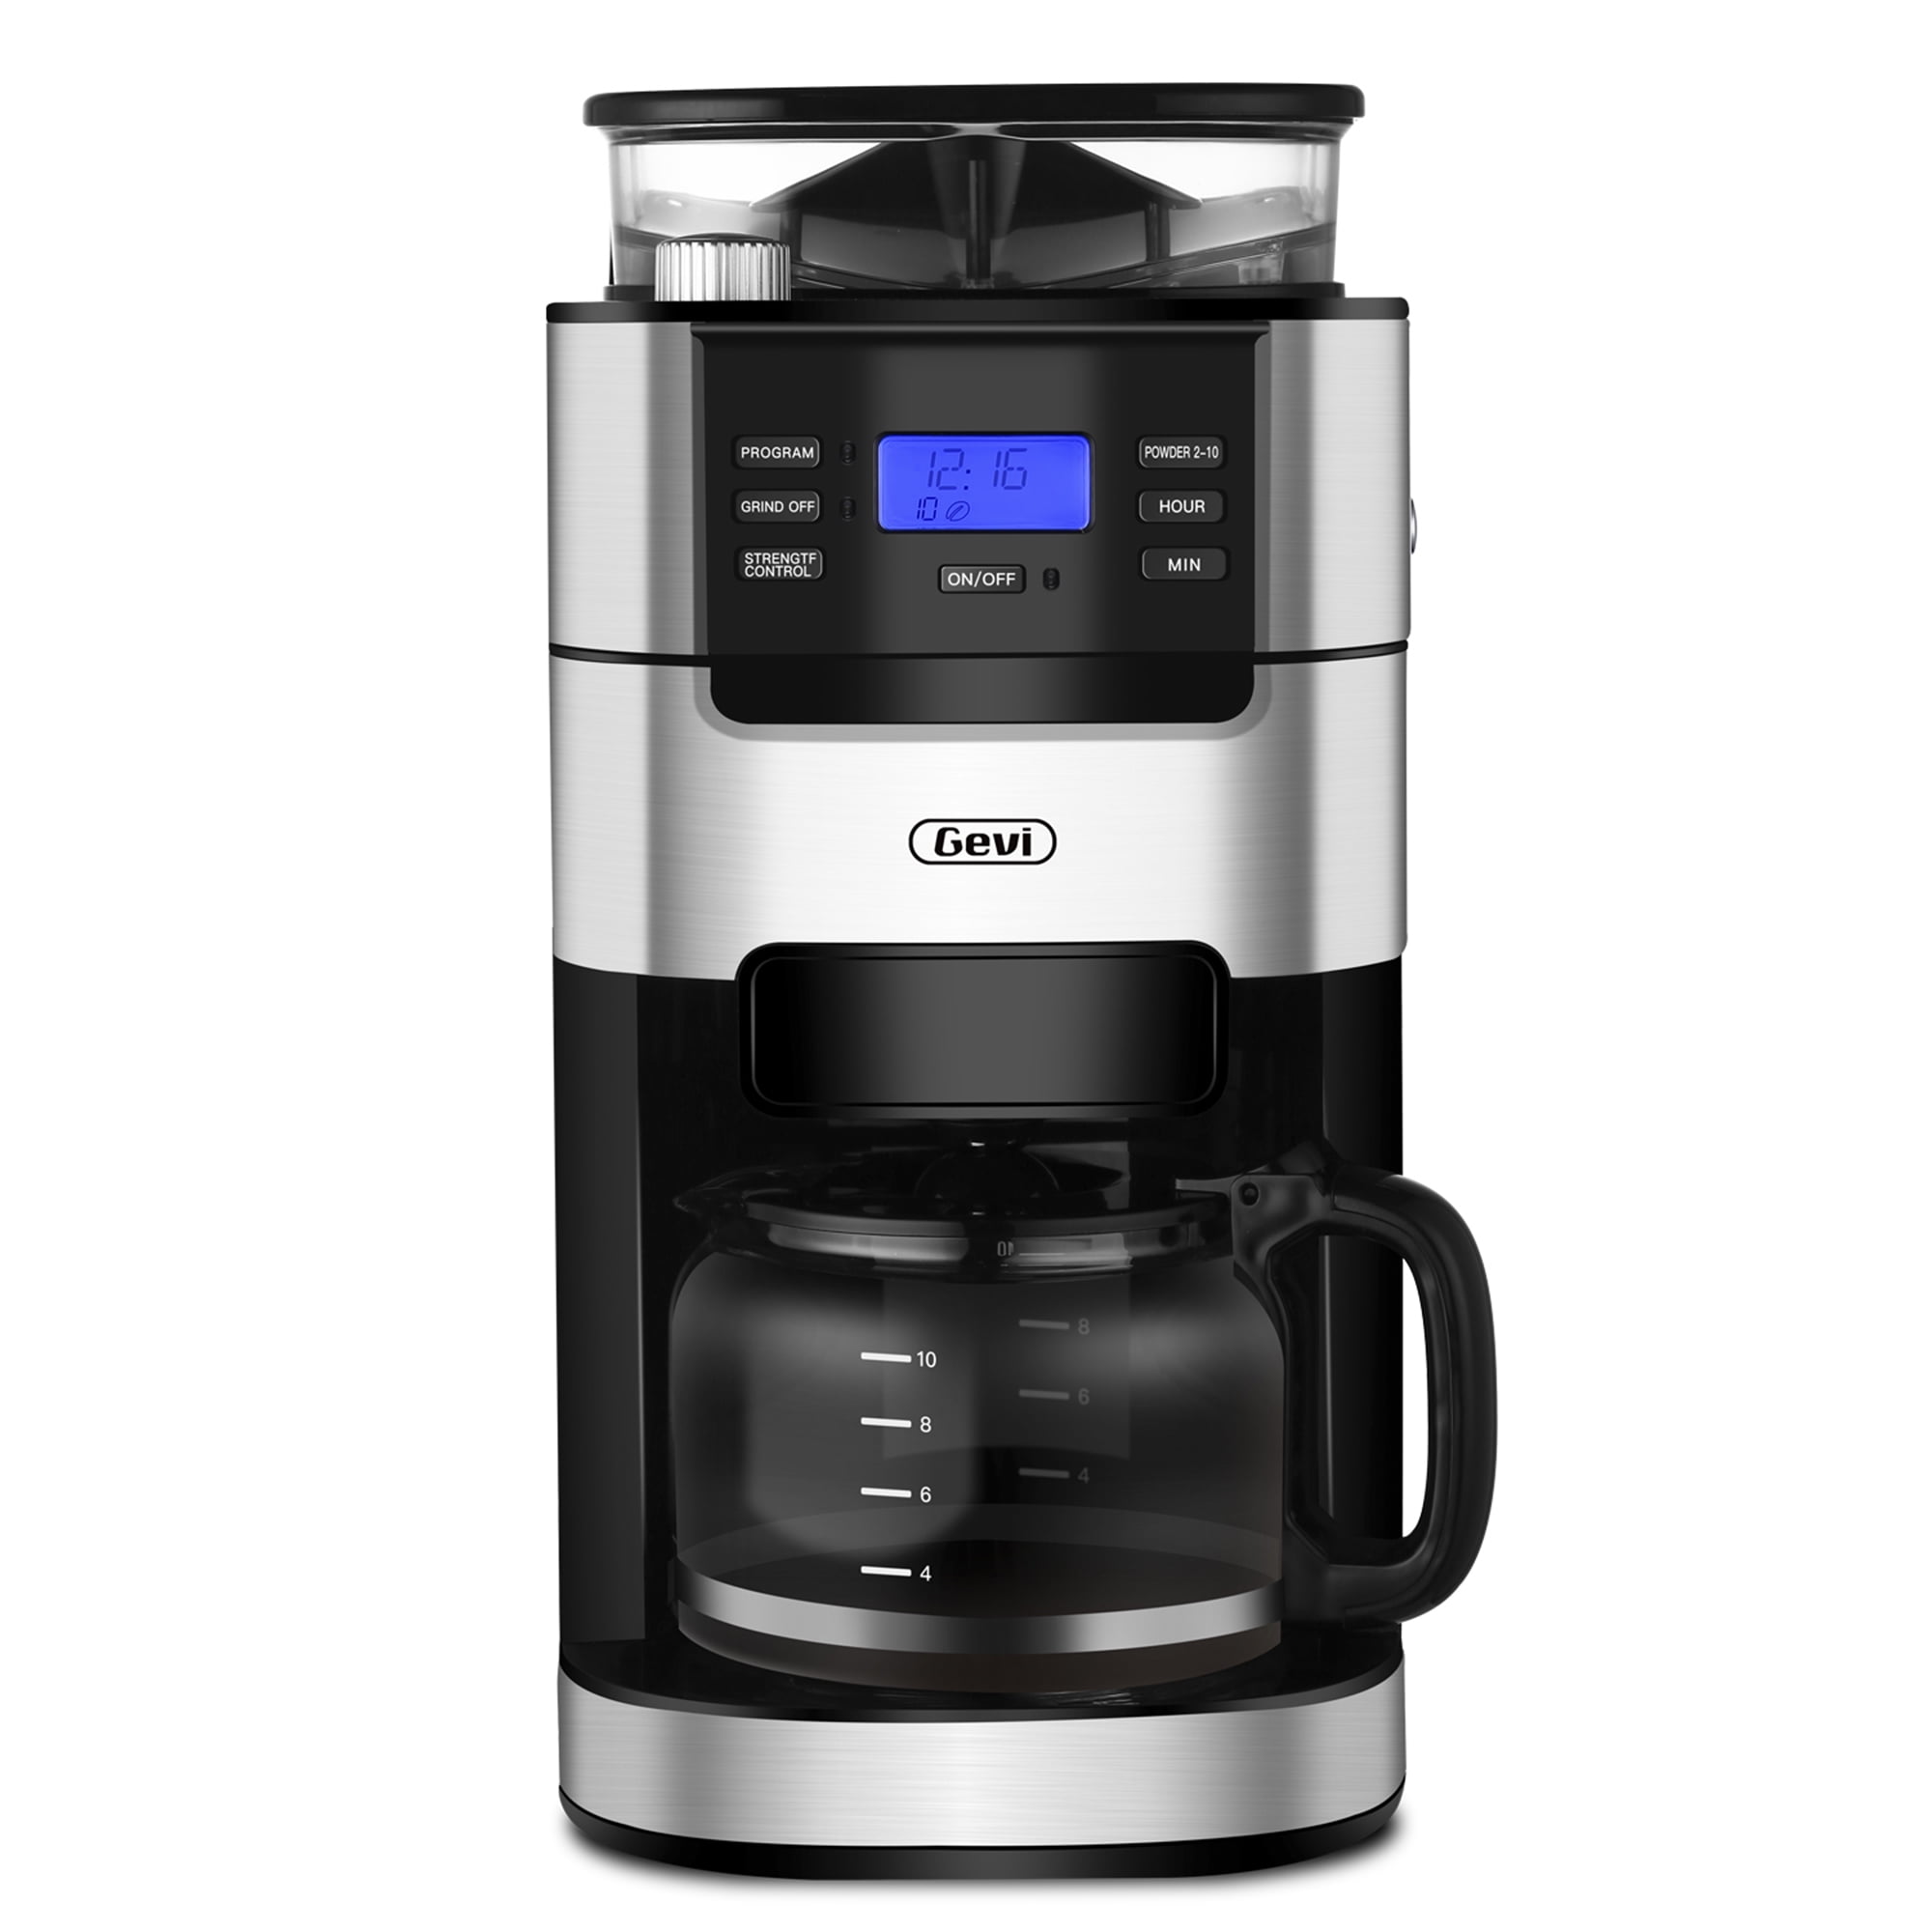 Gevi 4 Cup Automatic Drip Coffee Maker One Button Control New  Condition,600mL,Black